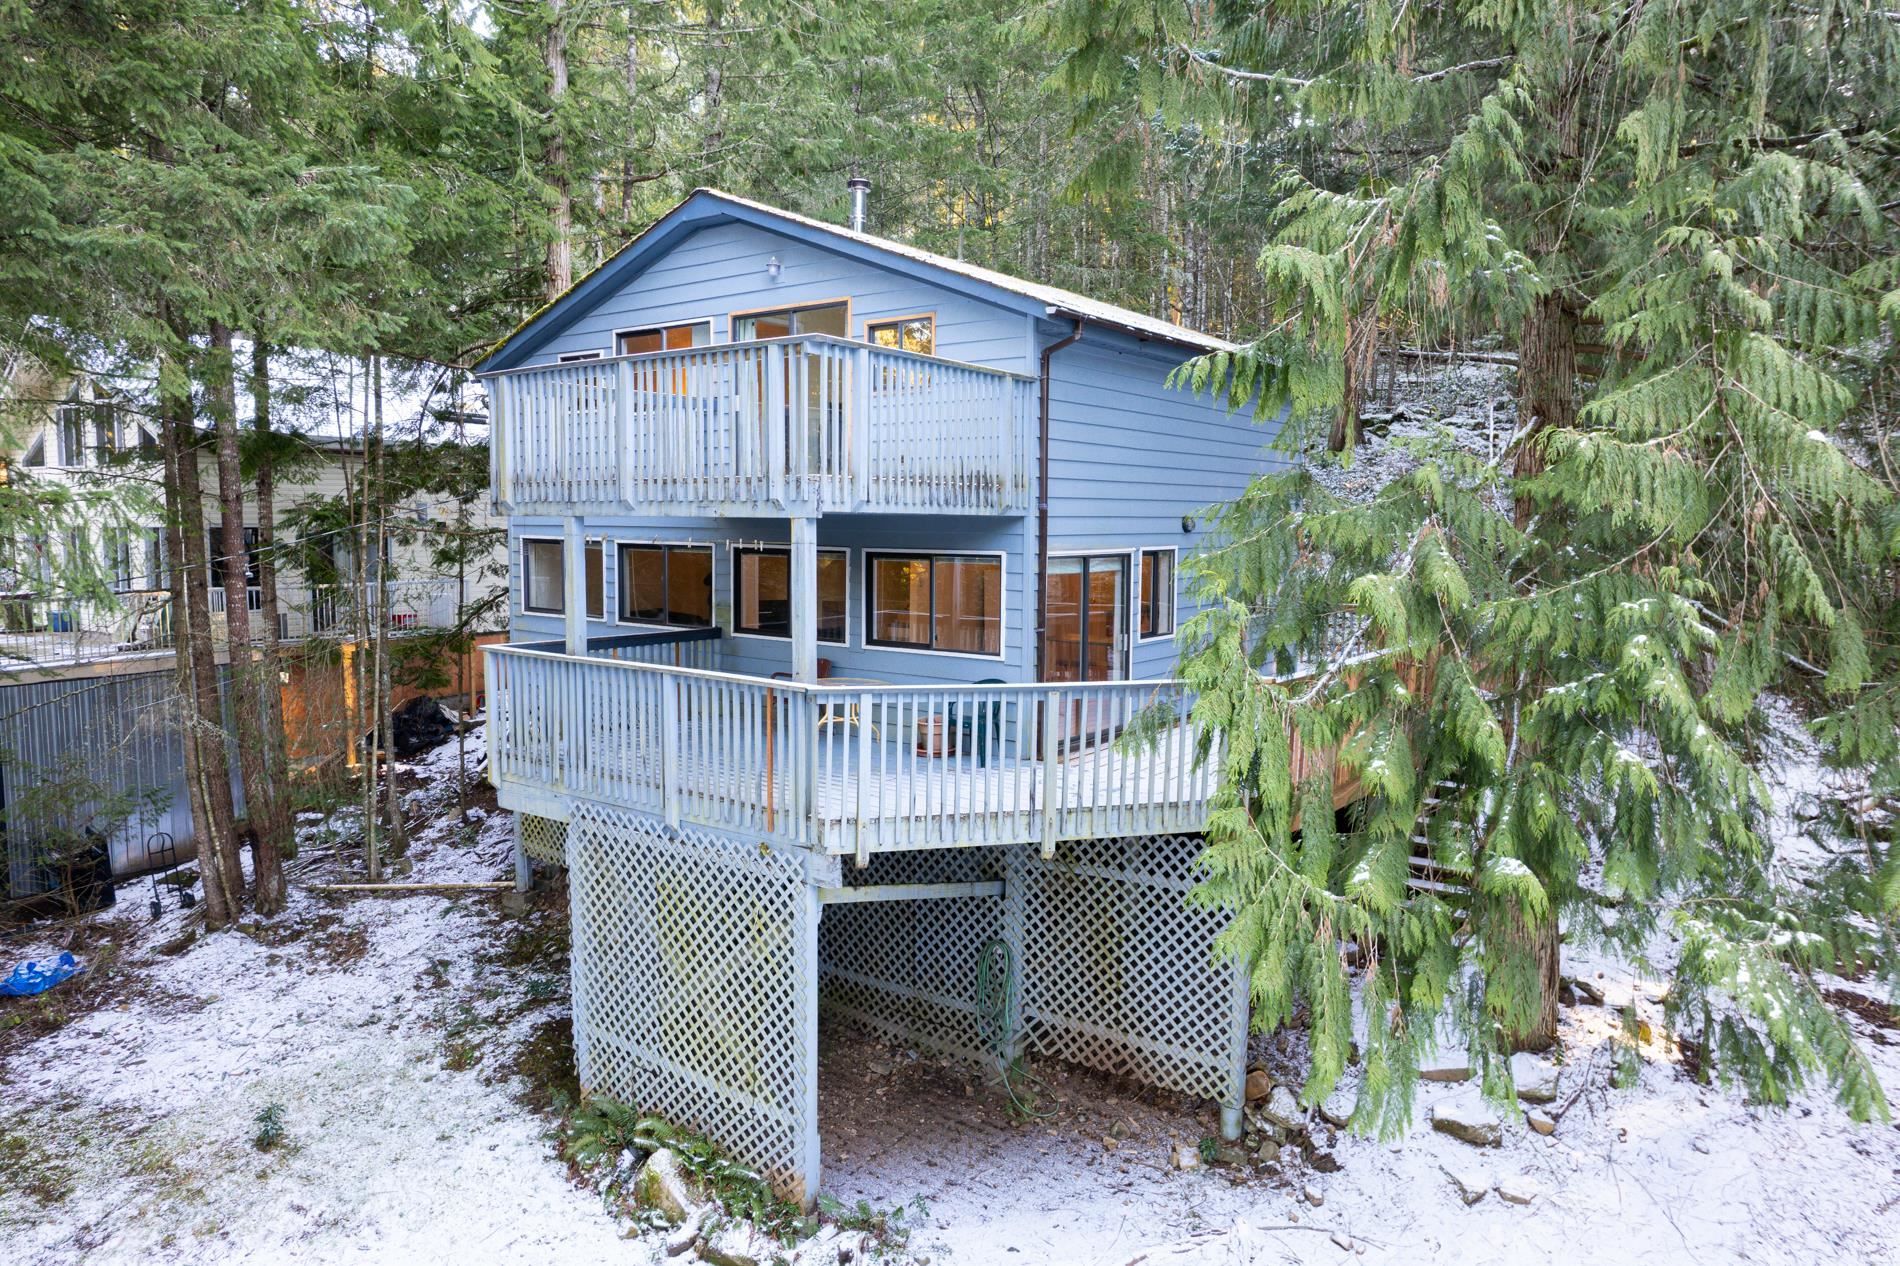 Main Photo: 312 MARINERS WAY in : Mayne Island House for sale : MLS®# R2666153